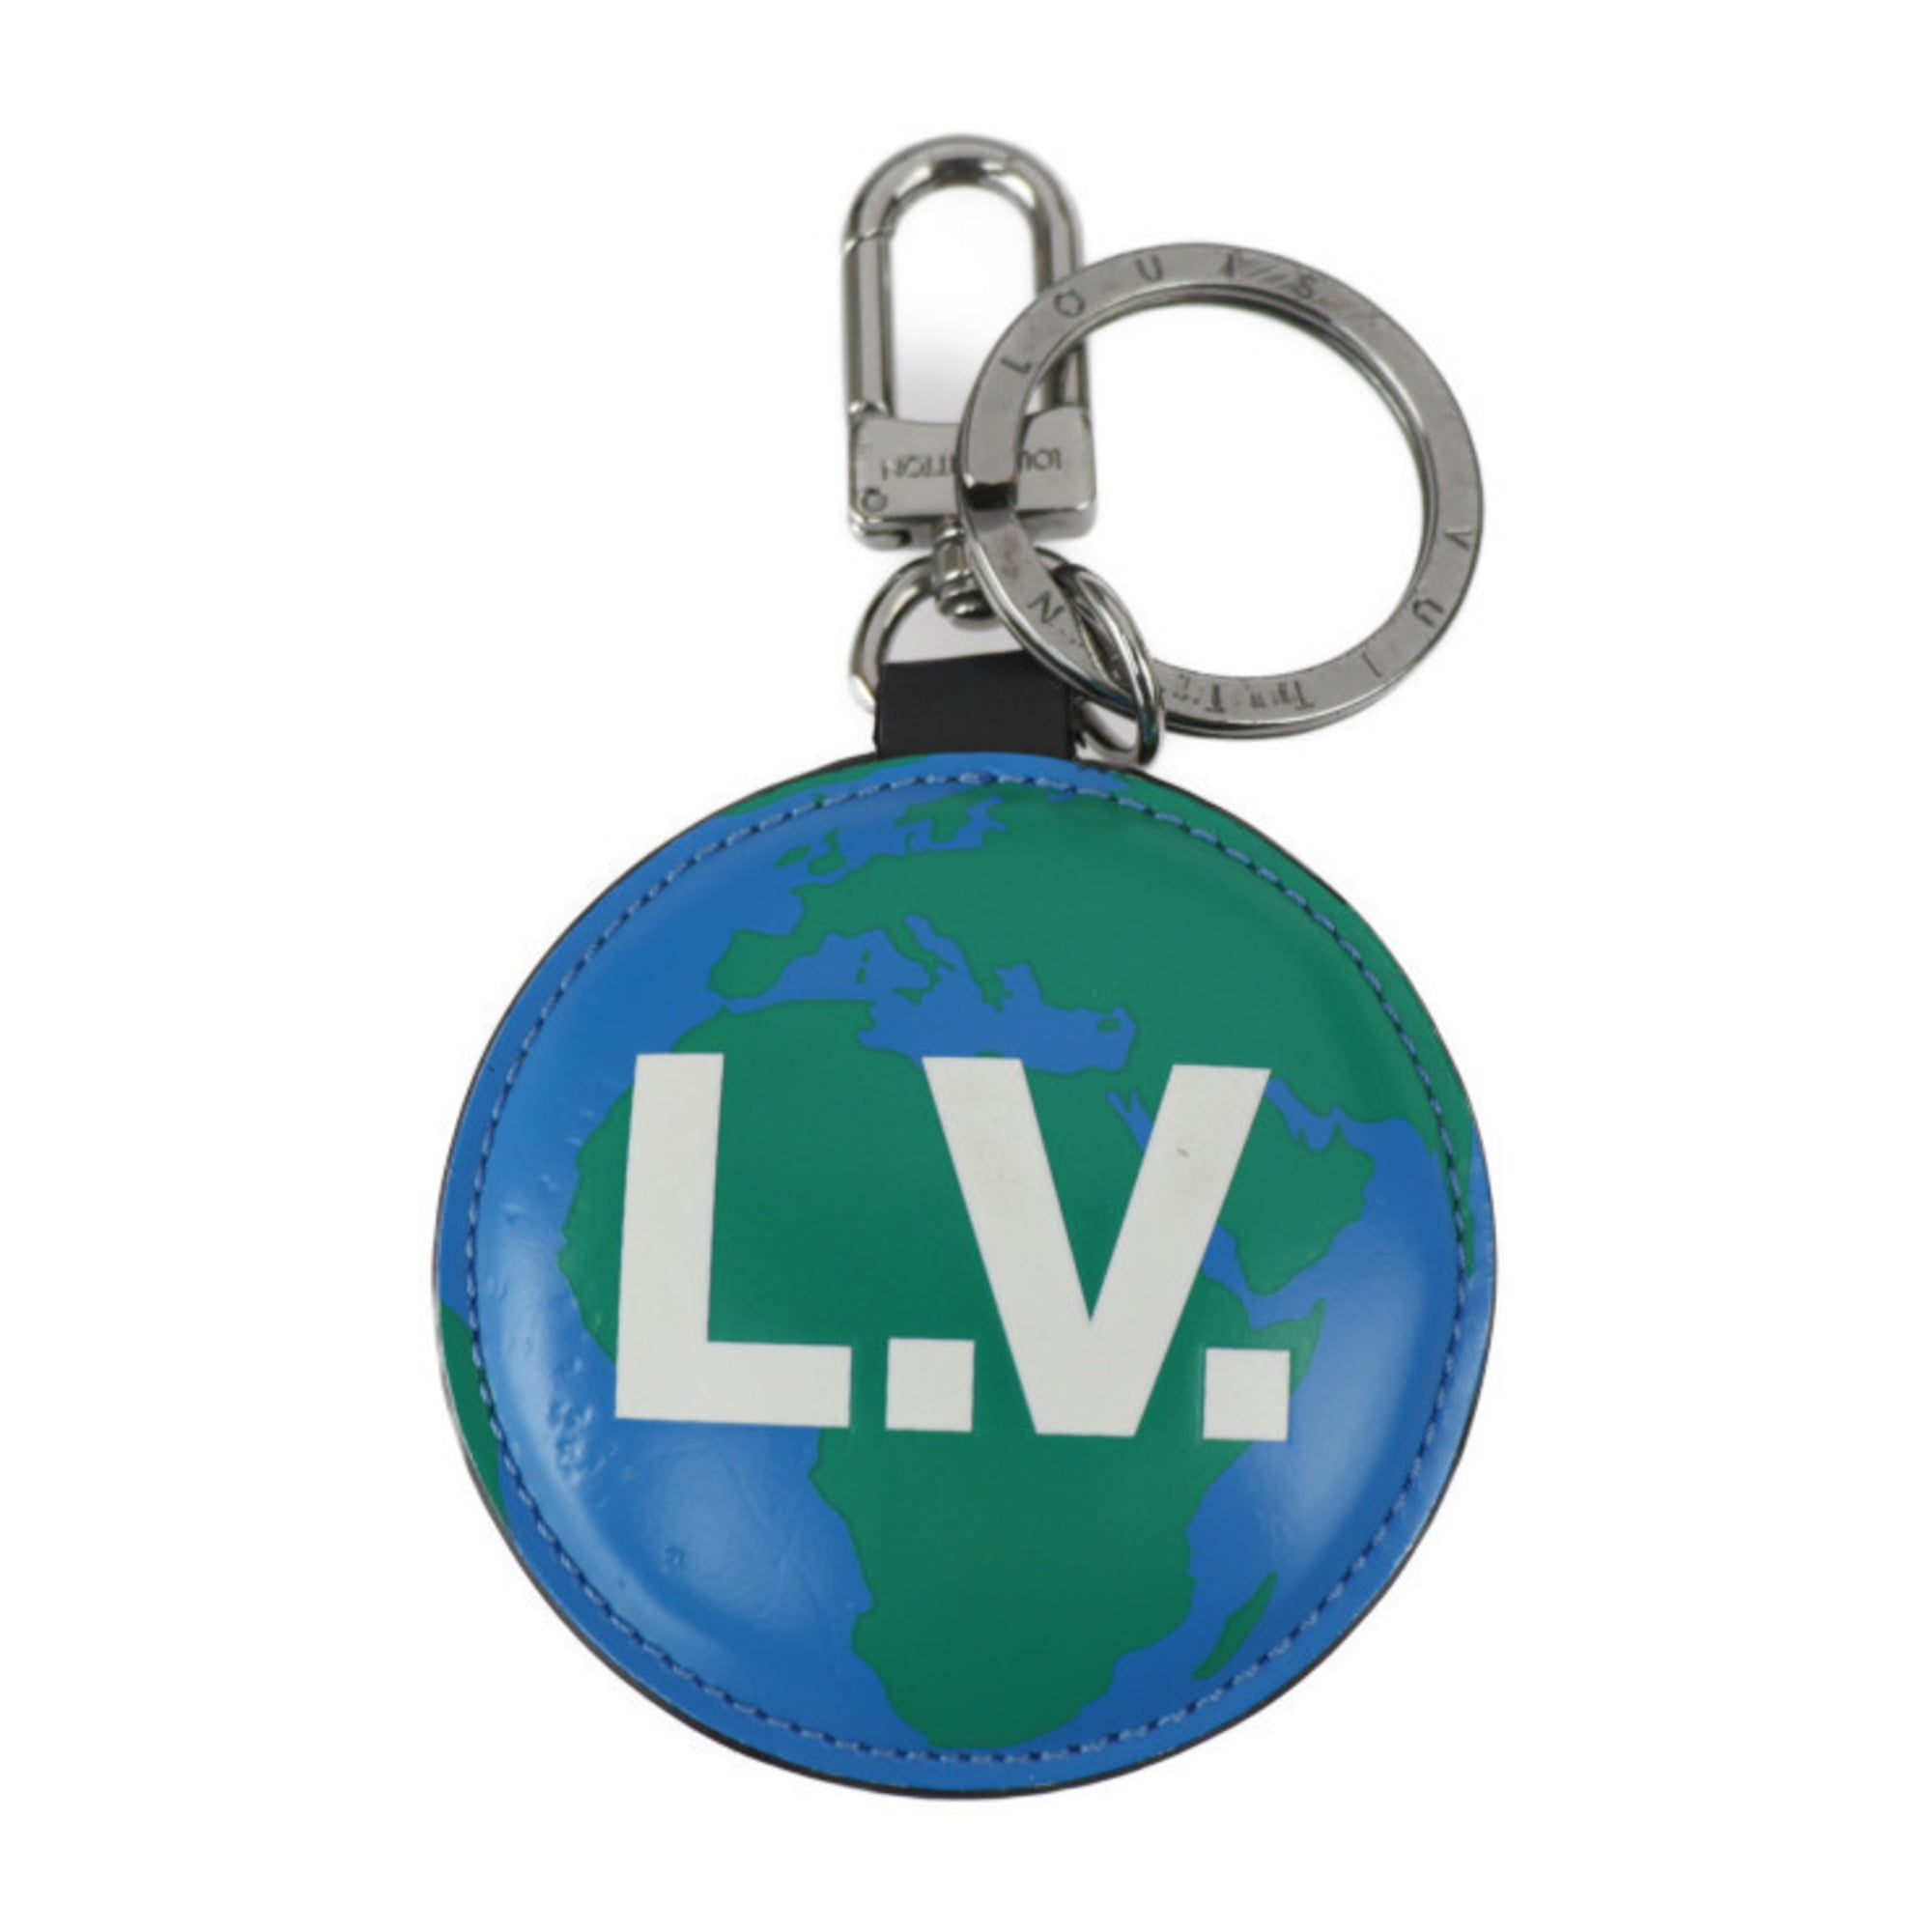 Authenticated Used LOUIS VUITTON Louis Vuitton Portocre paddock key holder  M68307 monogram canvas leather brown blue green white silver metal fittings  ring bag charm 